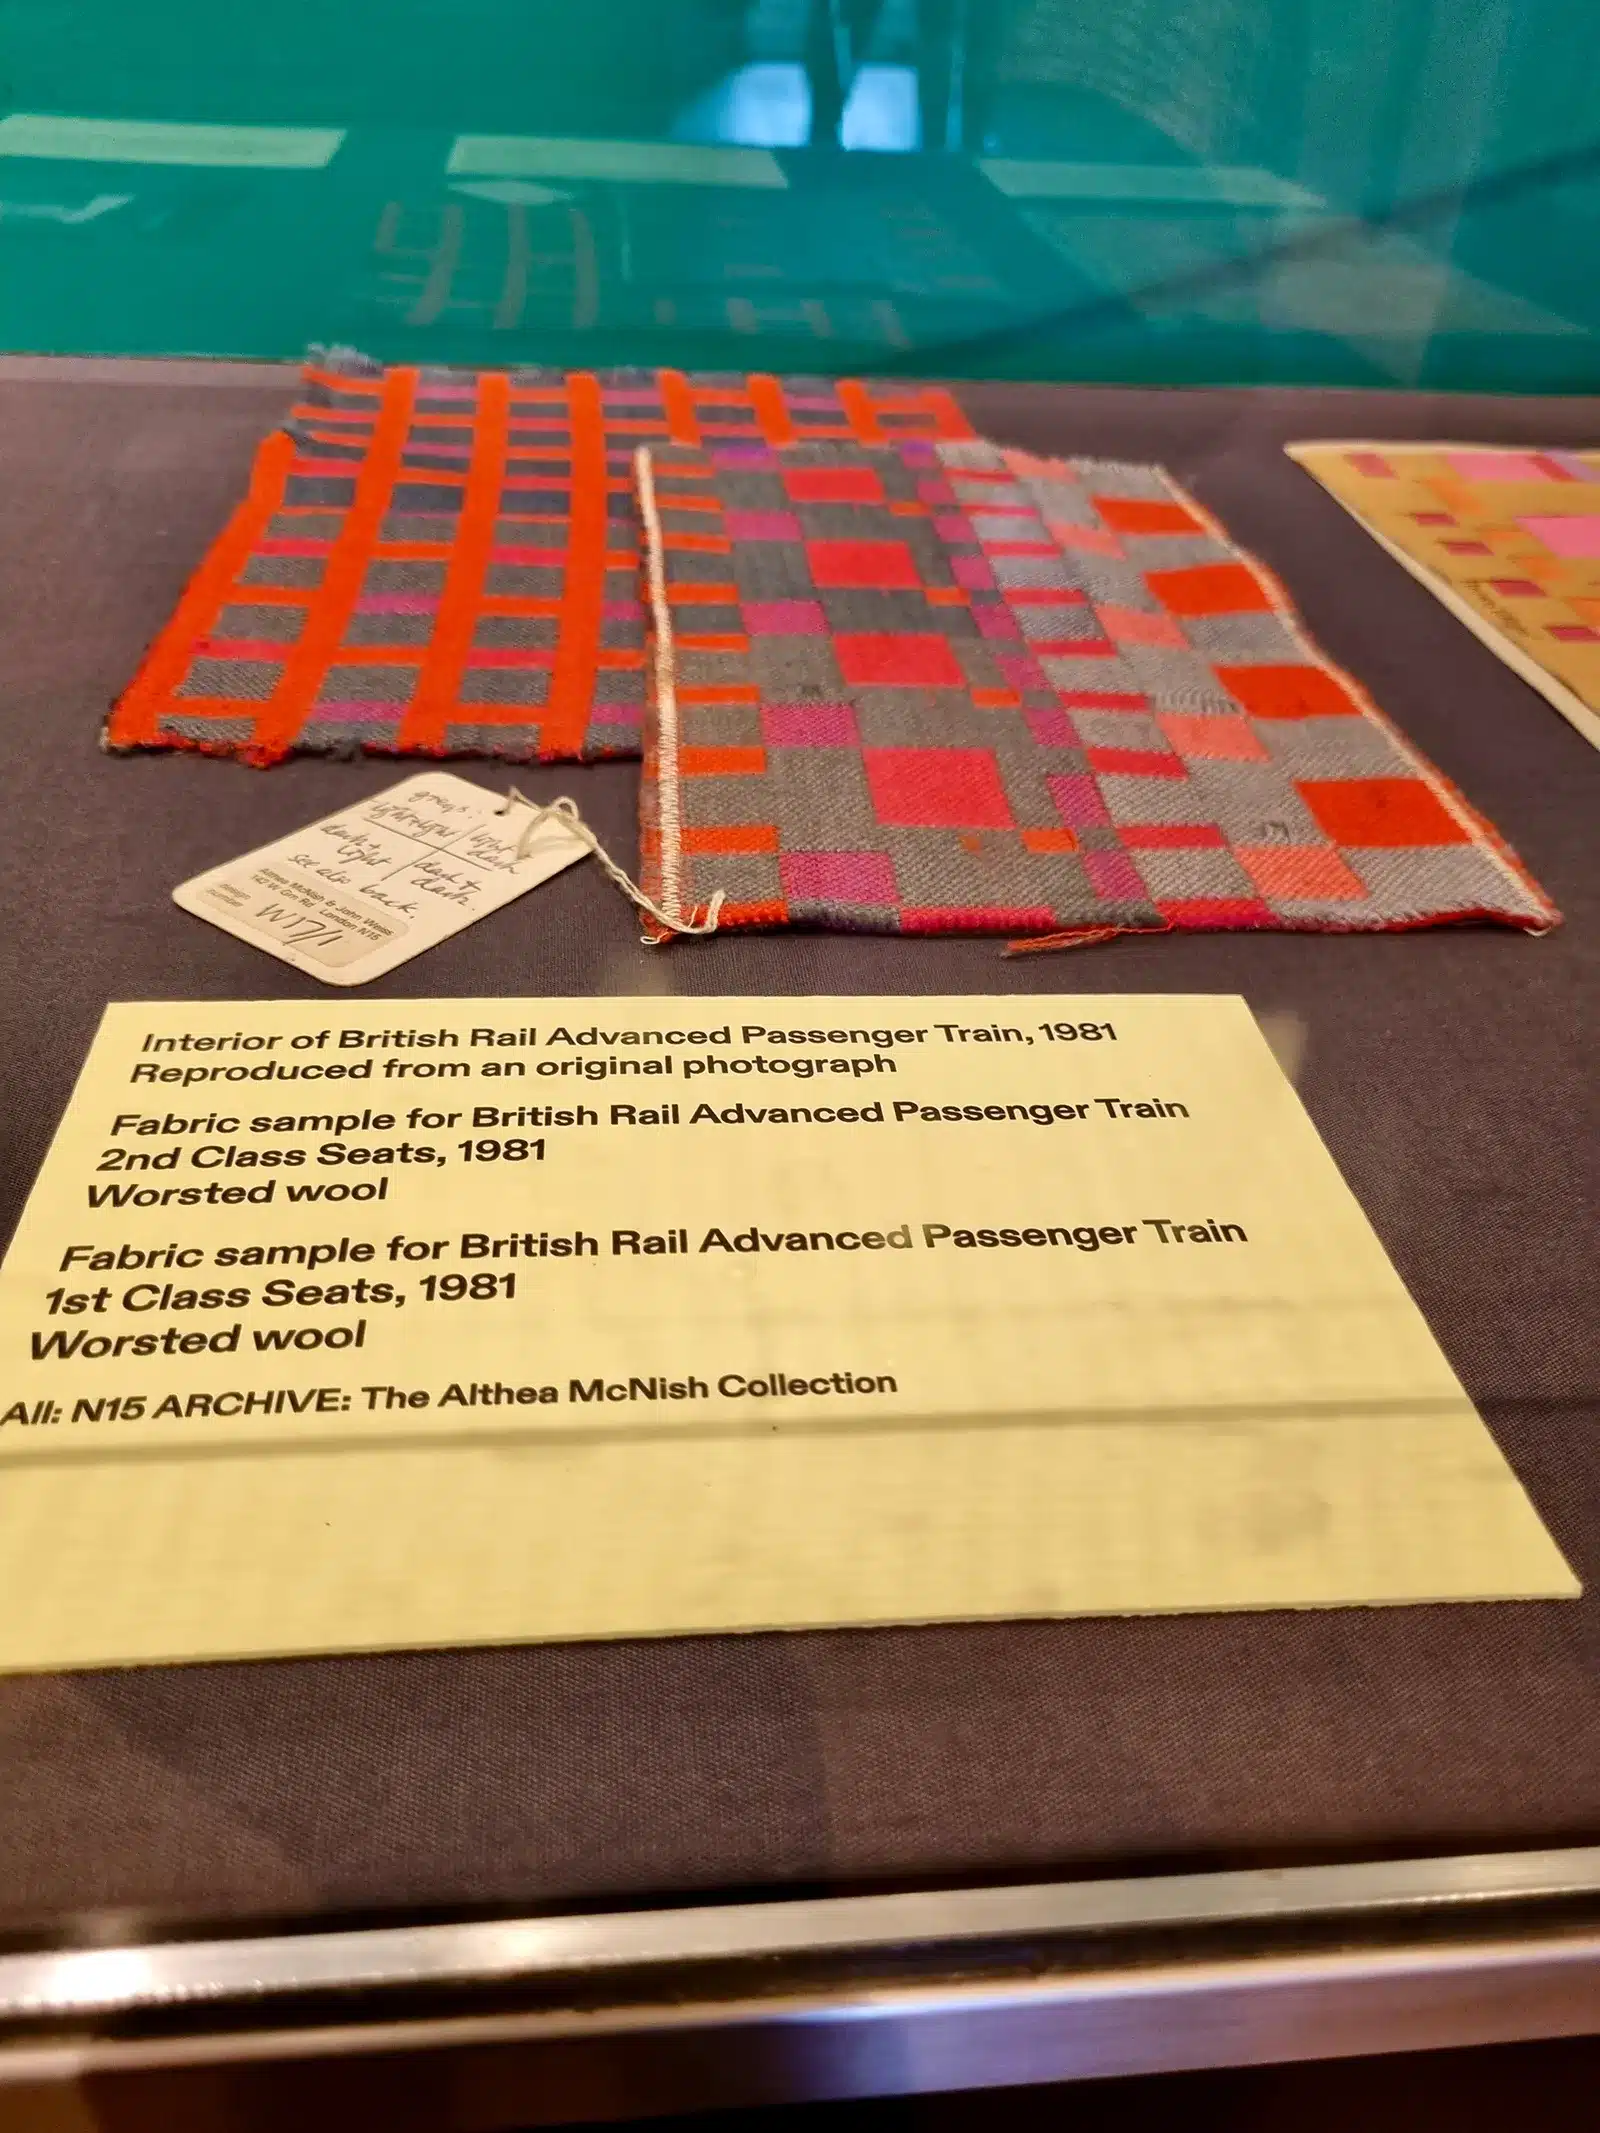 A display of a collection of textiles in a glass case.